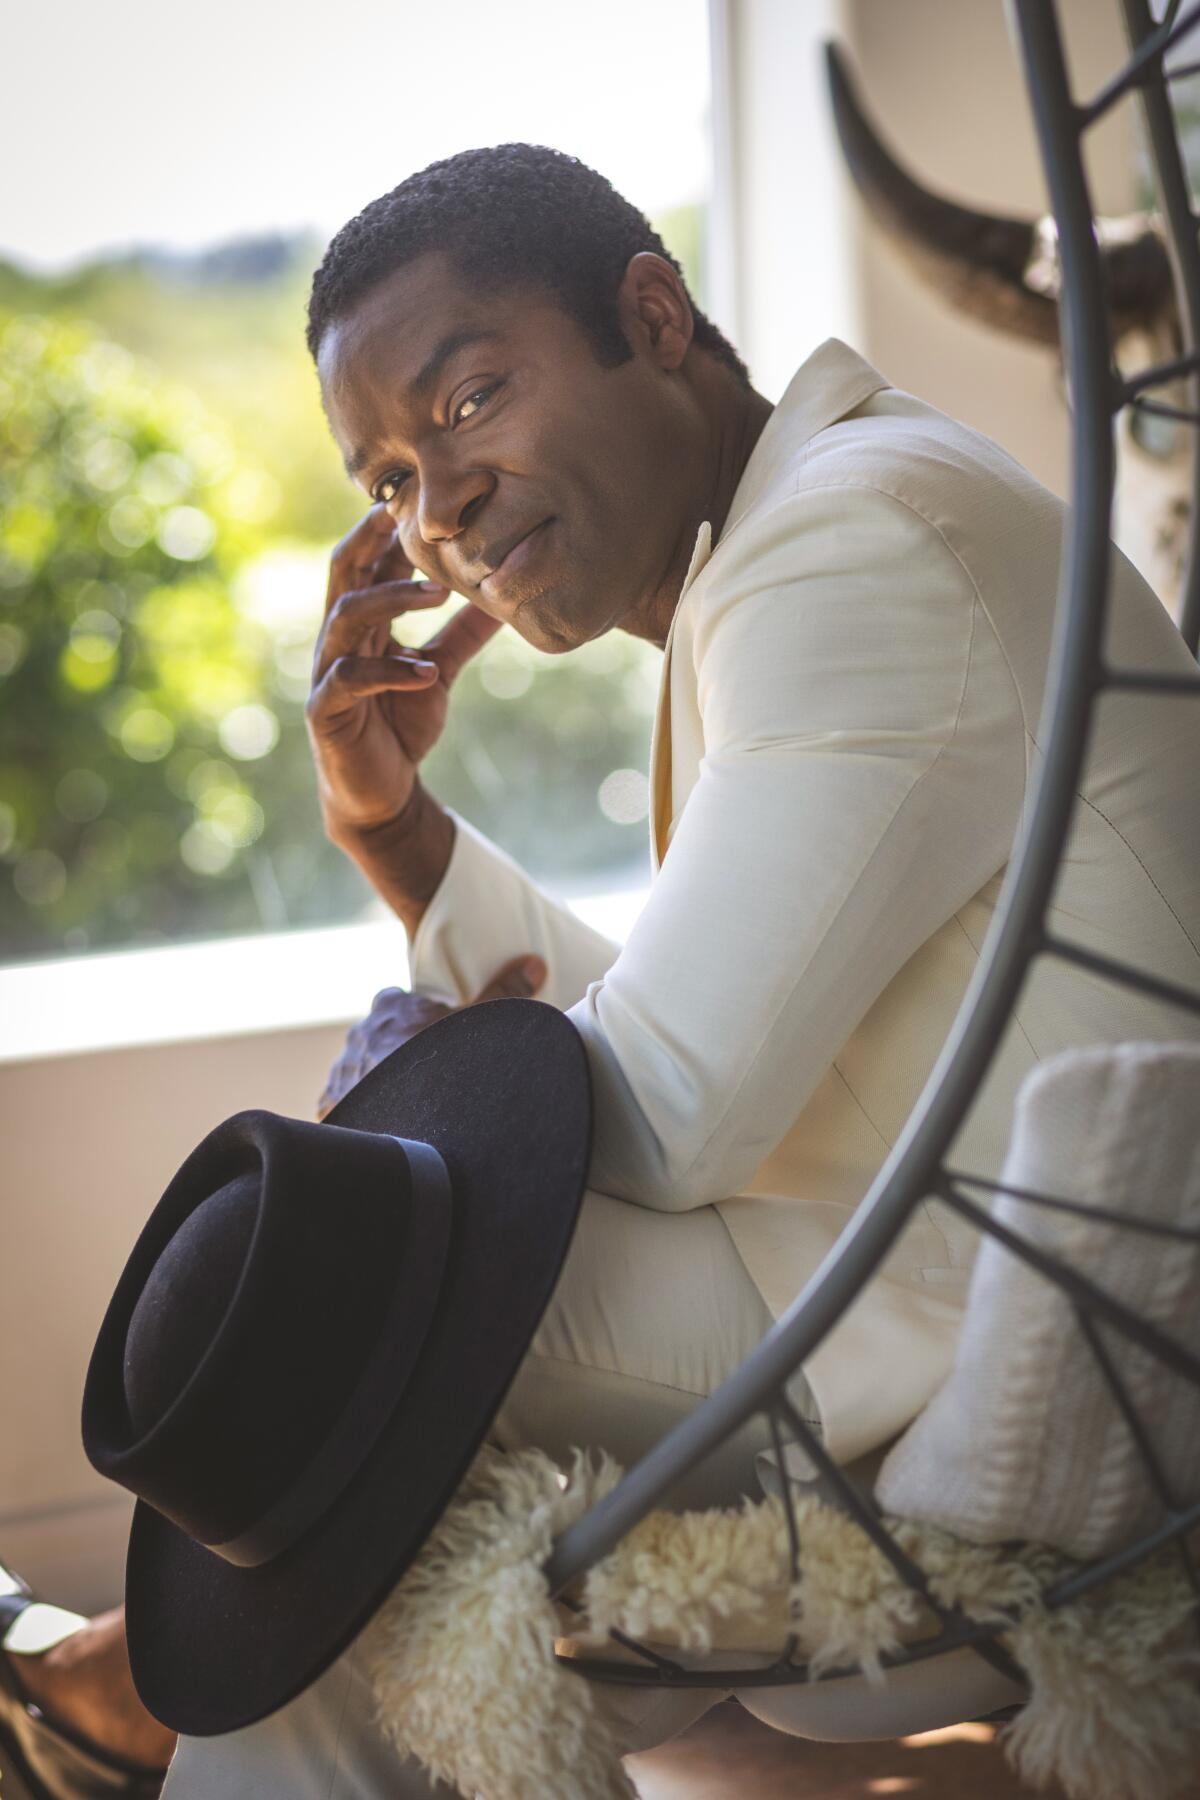 Actor David Oyelowo wears a white suit as he sits on his porch resting a black cowboy hat on his knee.